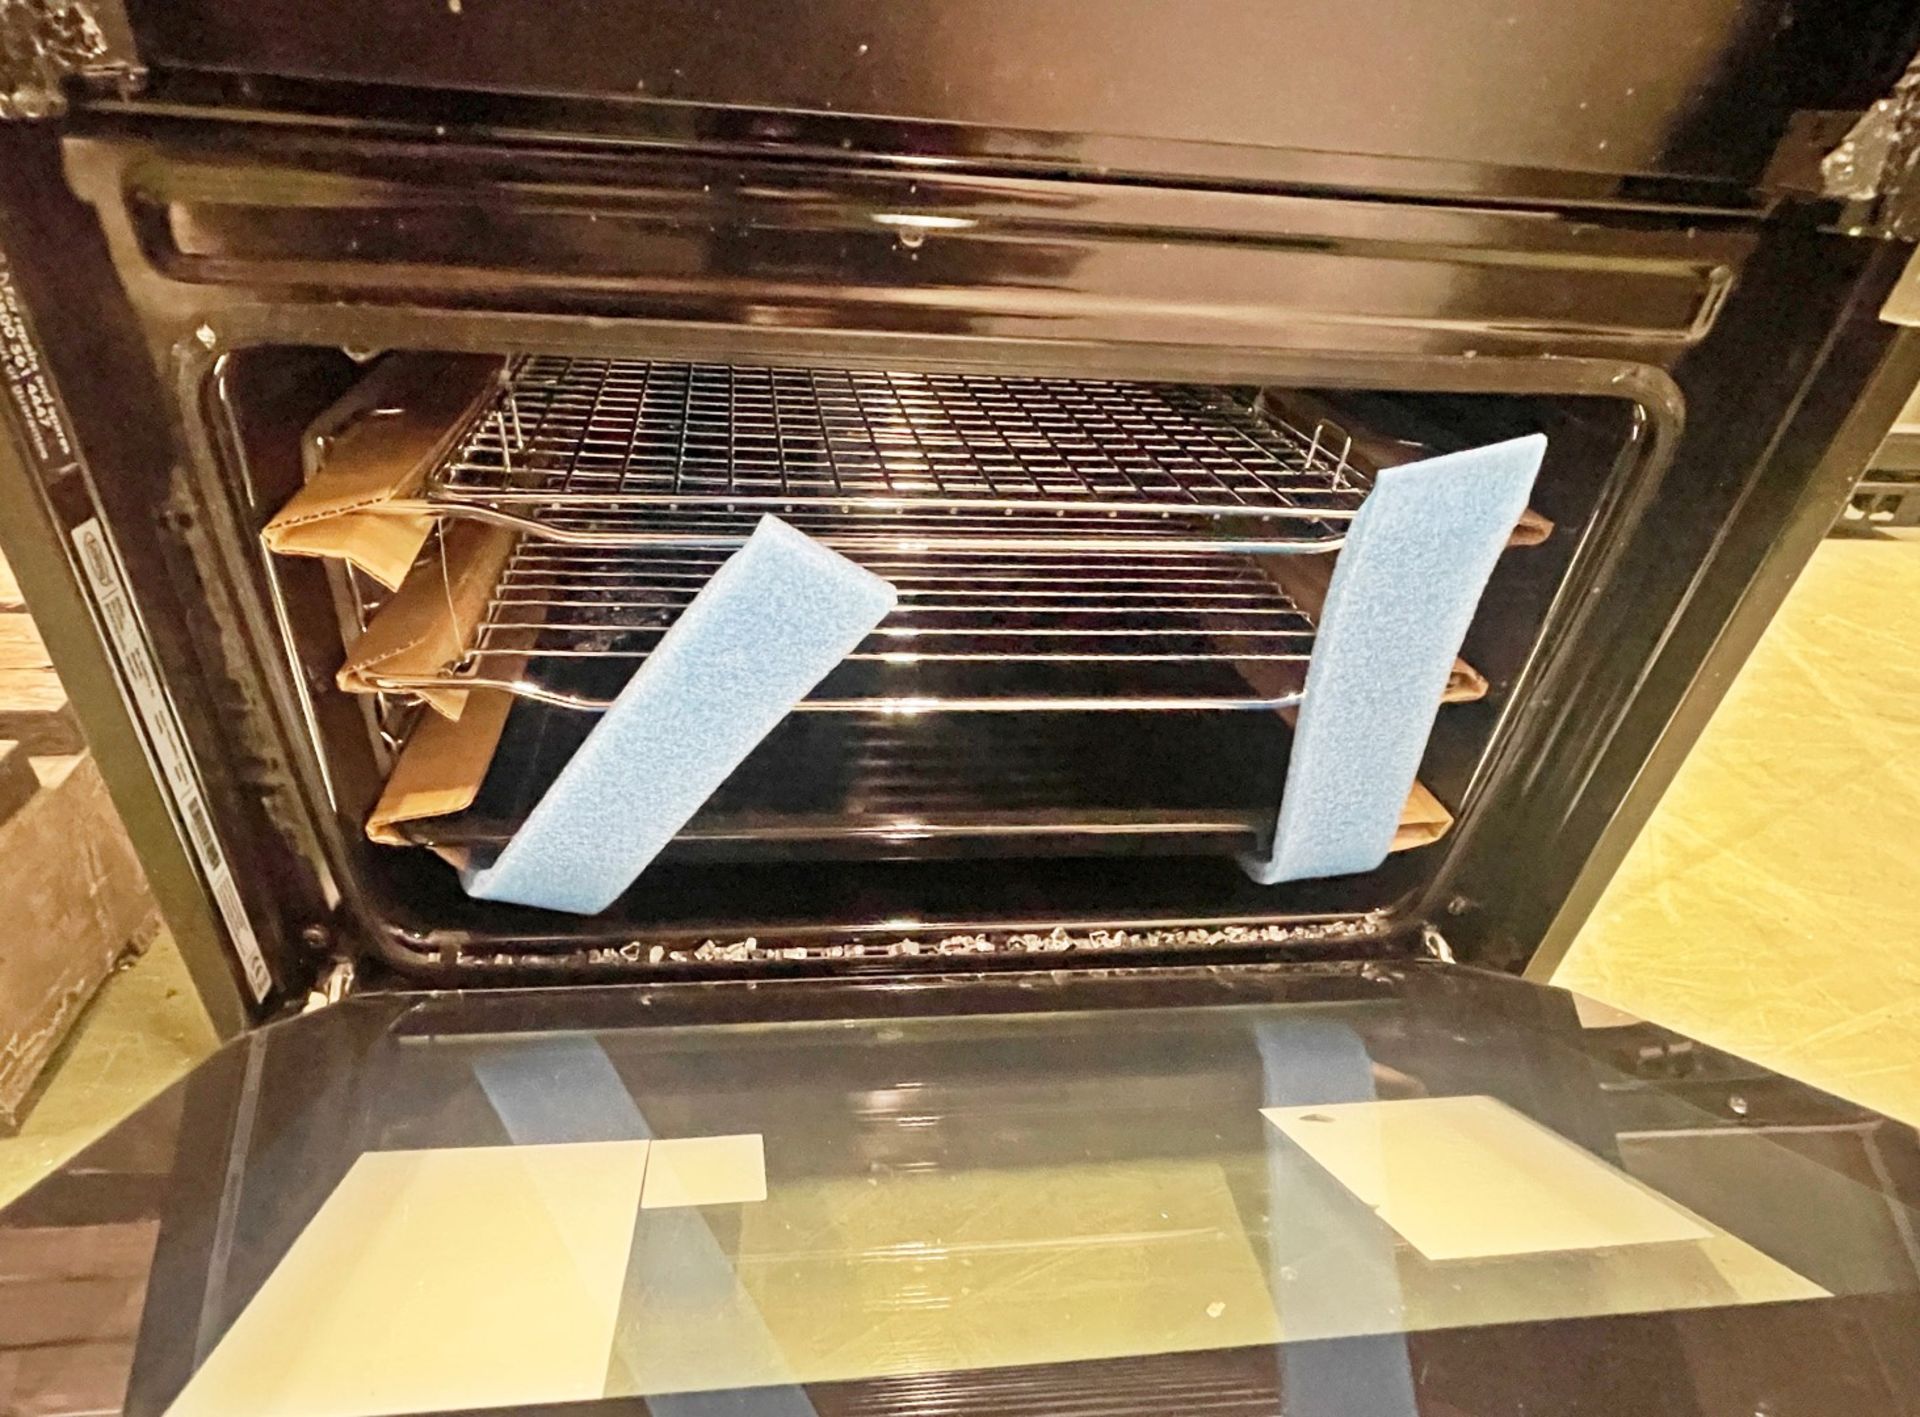 1 x Belling Integrated Oven - New and Unused With Damaged Glass Door - Image 5 of 7